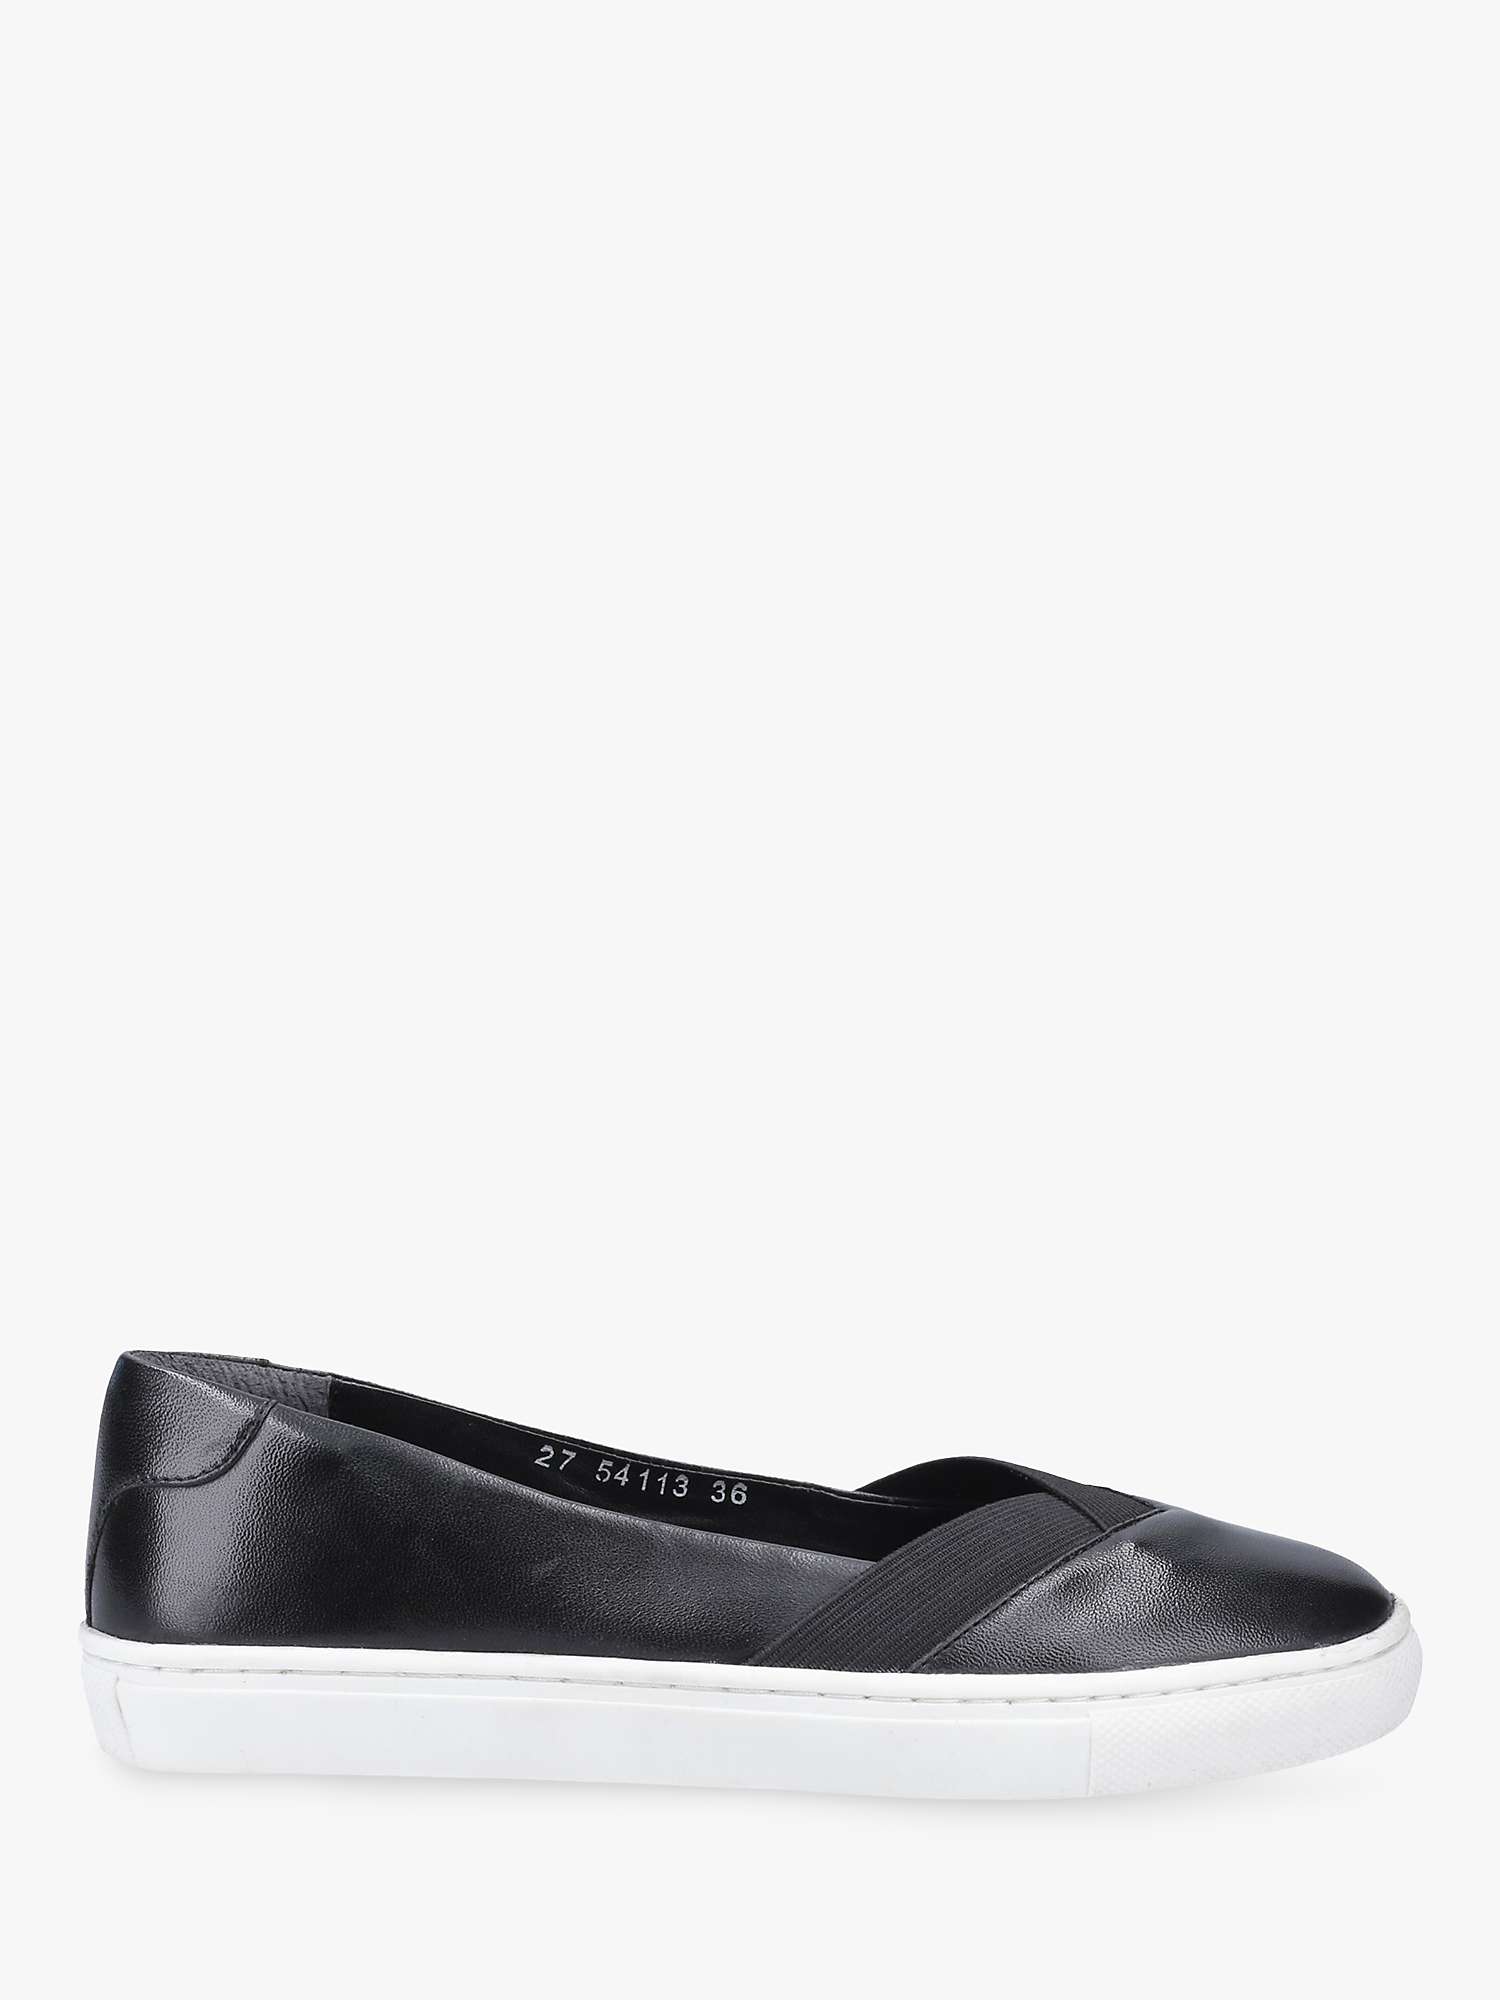 Buy Hush Puppies Tiffany Leather Slip On Pumps, Black Online at johnlewis.com